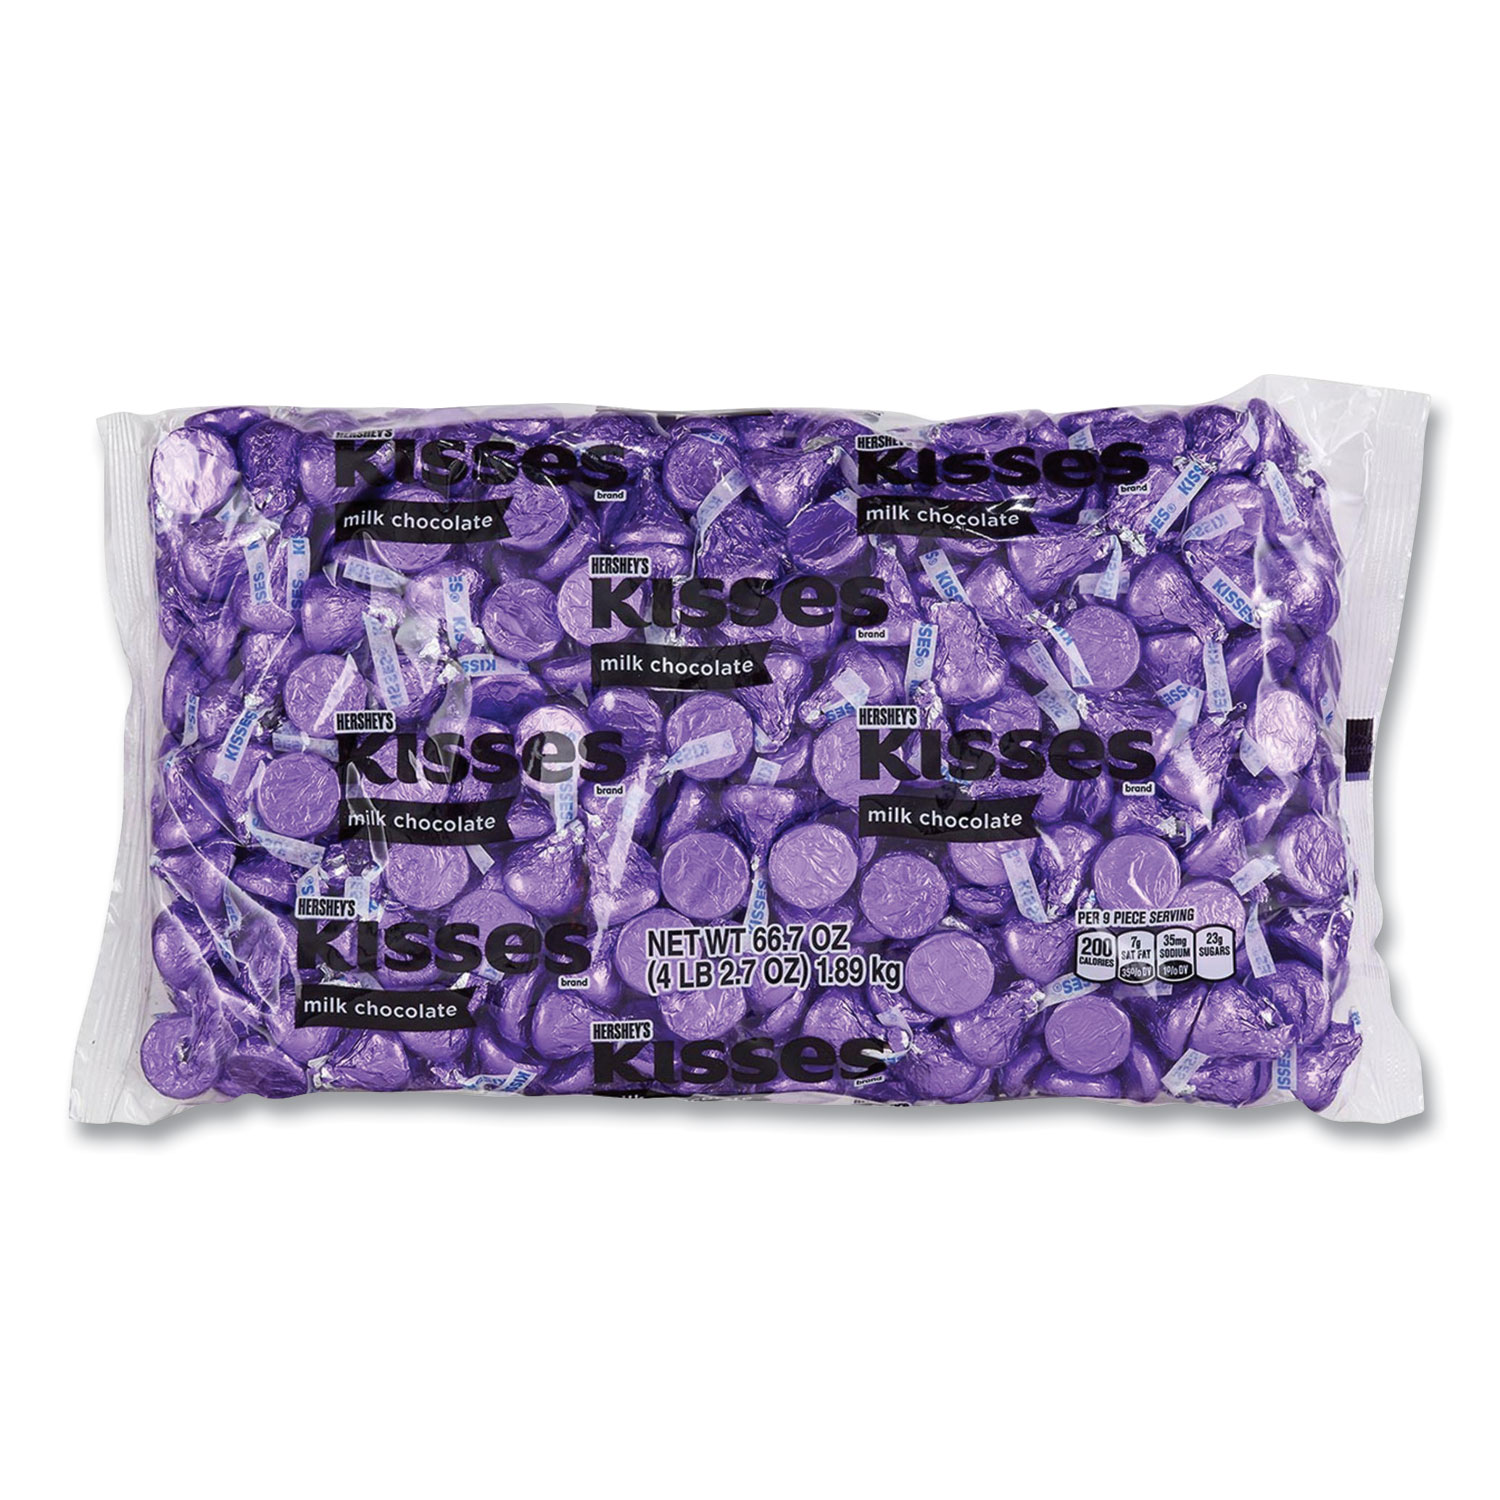  Hershey's 13328 KISSES, Milk Chocolate, Purple Wrappers, 66.7 oz Bag, Free Delivery in 1-4 Business Days (GRR24600243) 